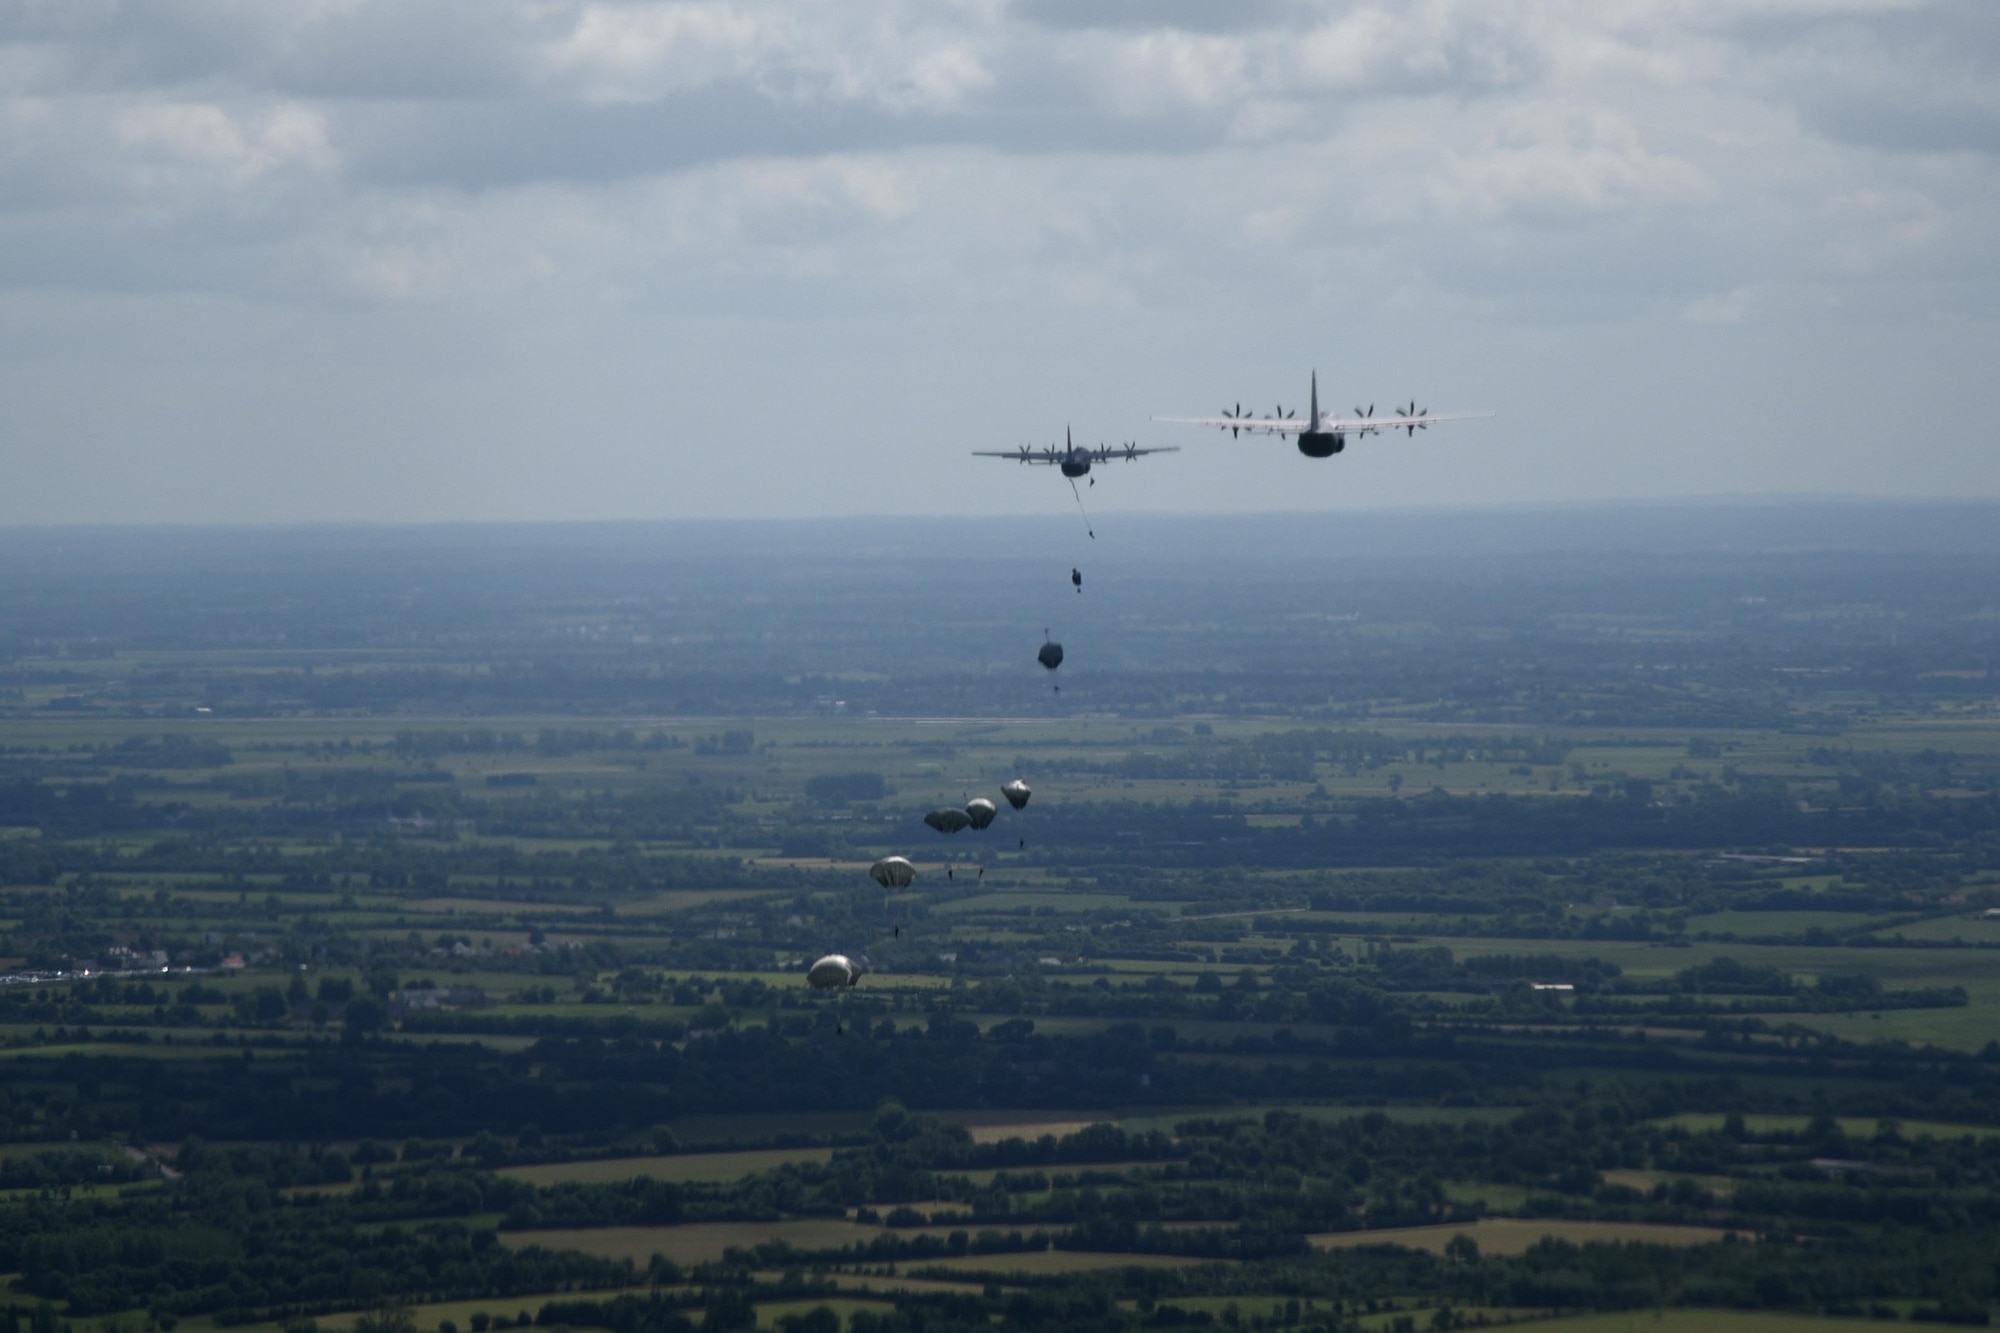 Paratroops jump from C-130J aircraft during a six-ship troop drop over Normandy, France. This event commemorates the 73rd anniversary of D-Day, the largest multi-national amphibious landing and operational military airdrop in history, and highlights the U.S.' steadfast commitment to European allies and partners. Overall, approximately 400 U.S. service members from units in Europe and the U.S. are participating in ceremonial D-Day events from May 31 to June 7, 2017(U.S. Air Force photo by Staff Sgt. Nicholas Monteleone)